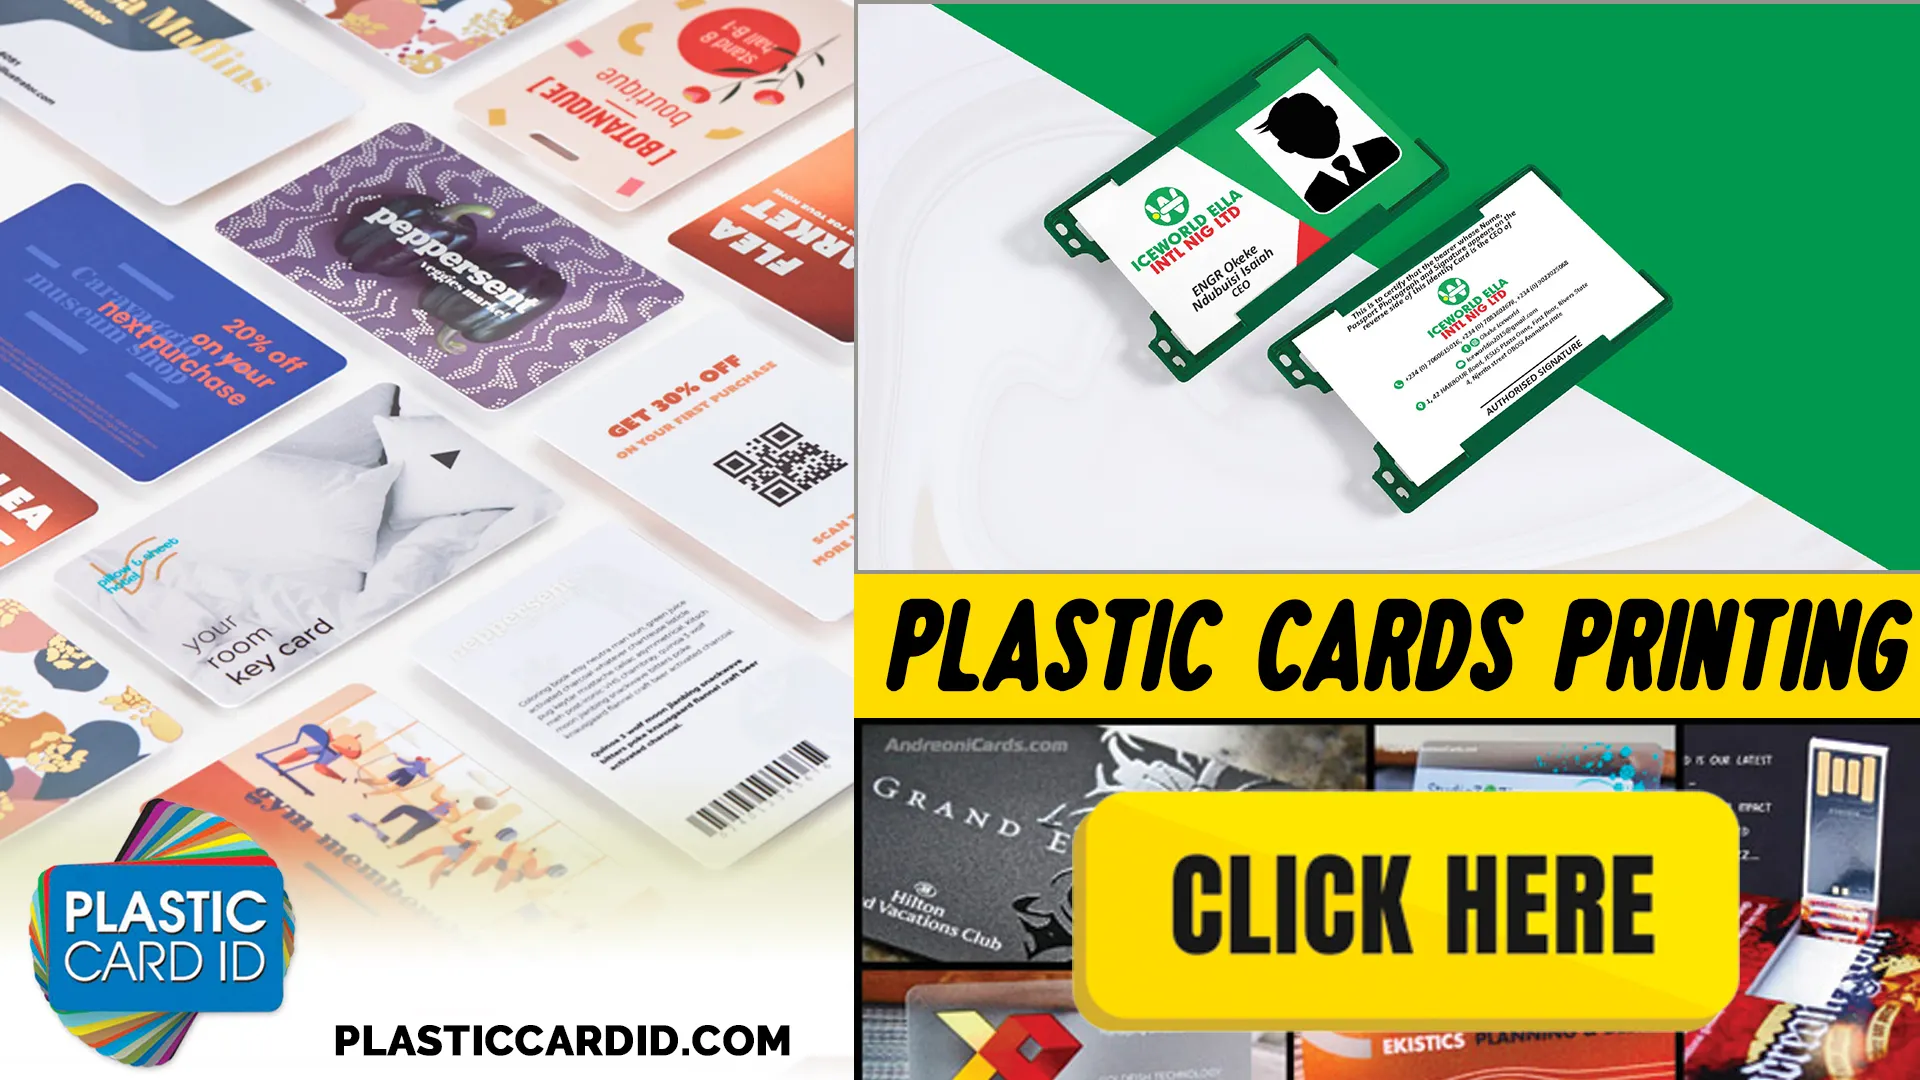 Plastic Card ID
: Harnessing the Power of Customization